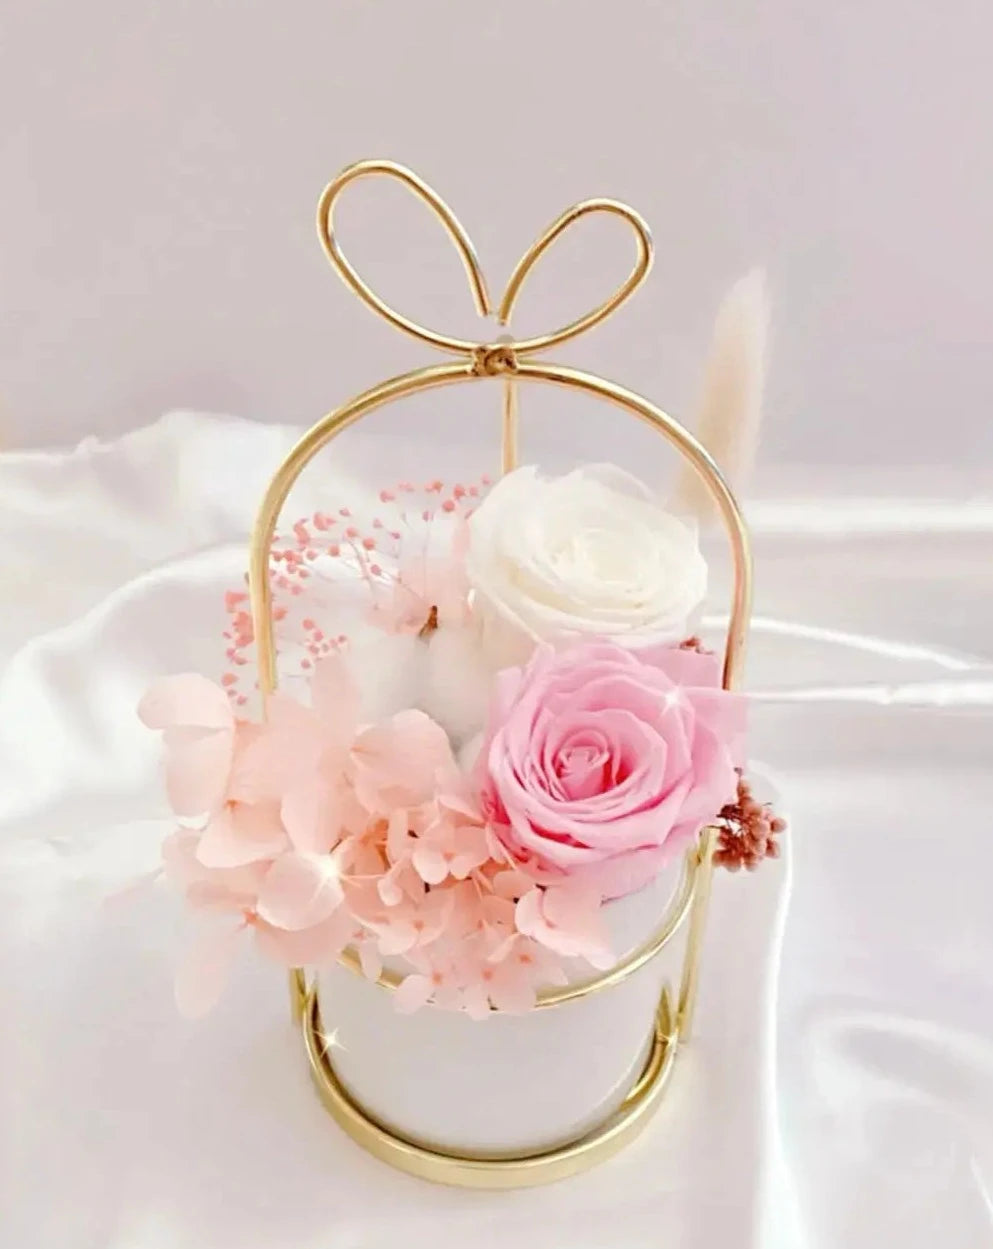 Preserved Pink and White Flower Arrangement in Mini Flower Pot with Bunny Ears The Rose Ark